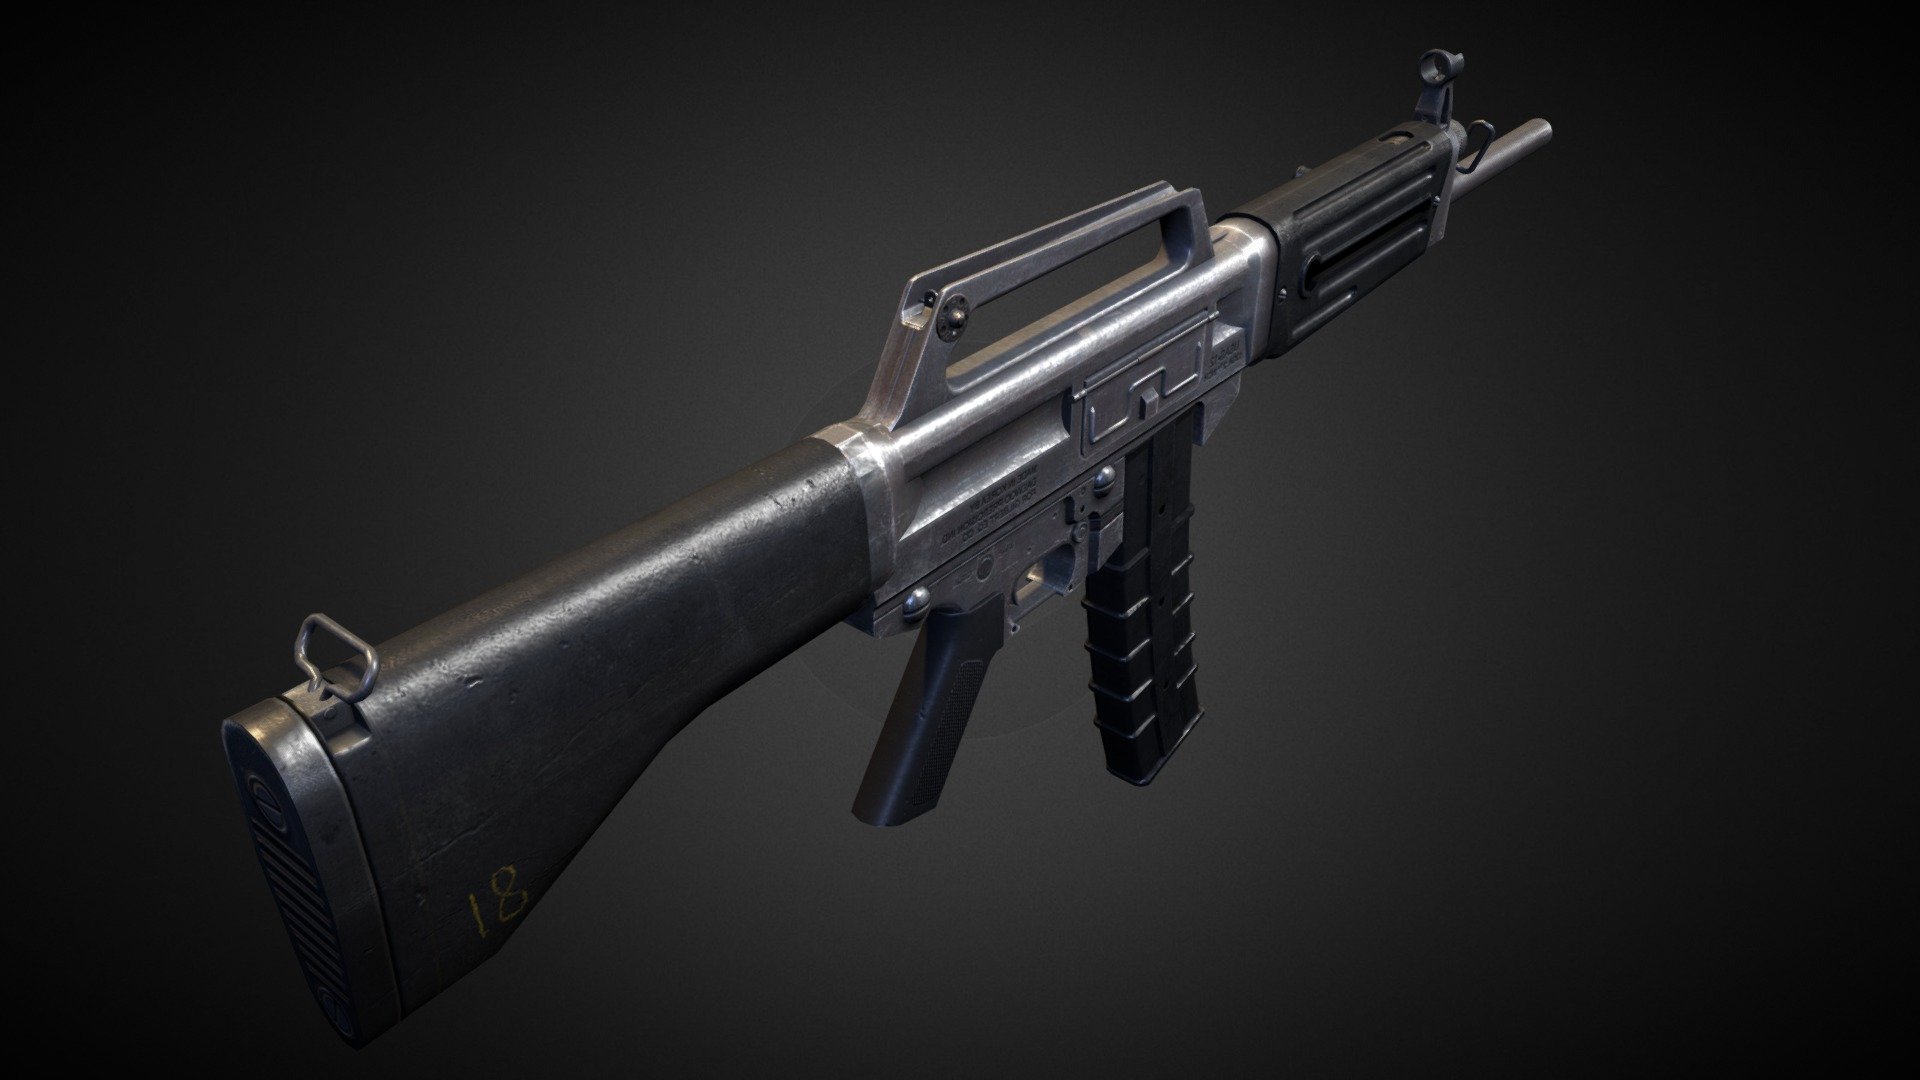 A USAS-12 shotgun. A couple of smoothing errors popped up at the front when importing onto Sketchfab, but the actual model's fine.

on 3 512x512 textures, I think (plus a 256x512 for the mag? it's been a while) 3d model